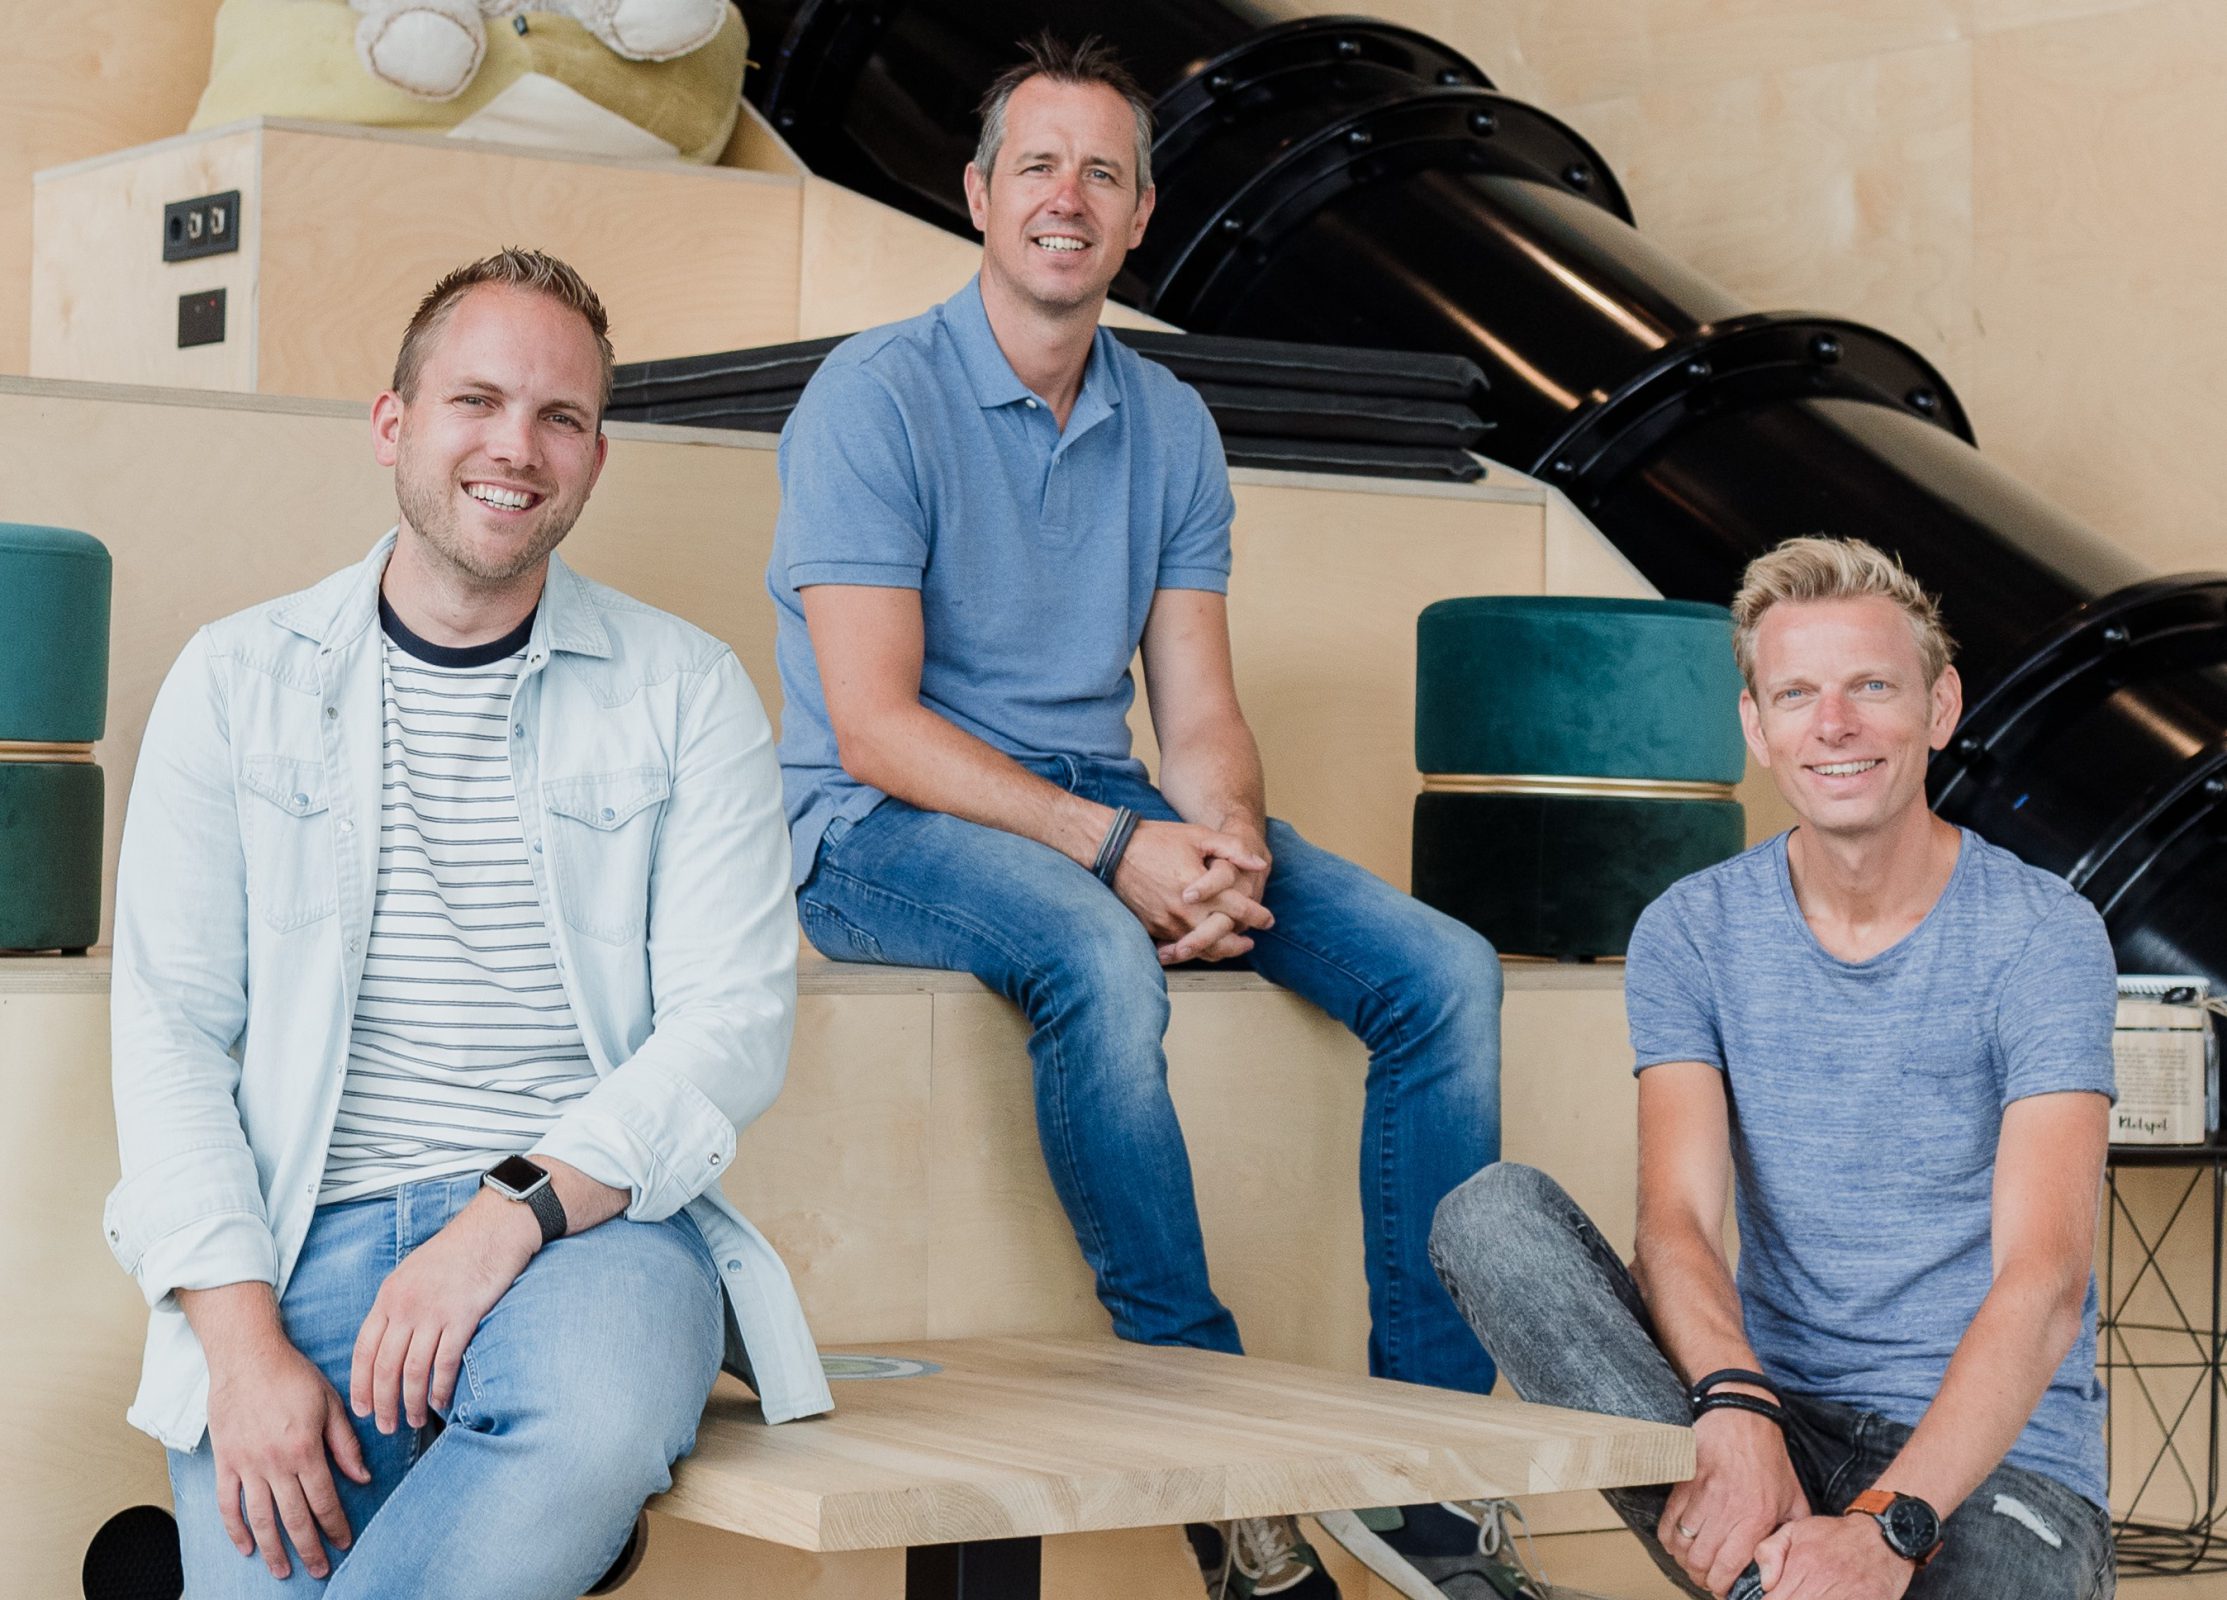 A photo of Wouter, Gerbrand and Arne from YourSurprise